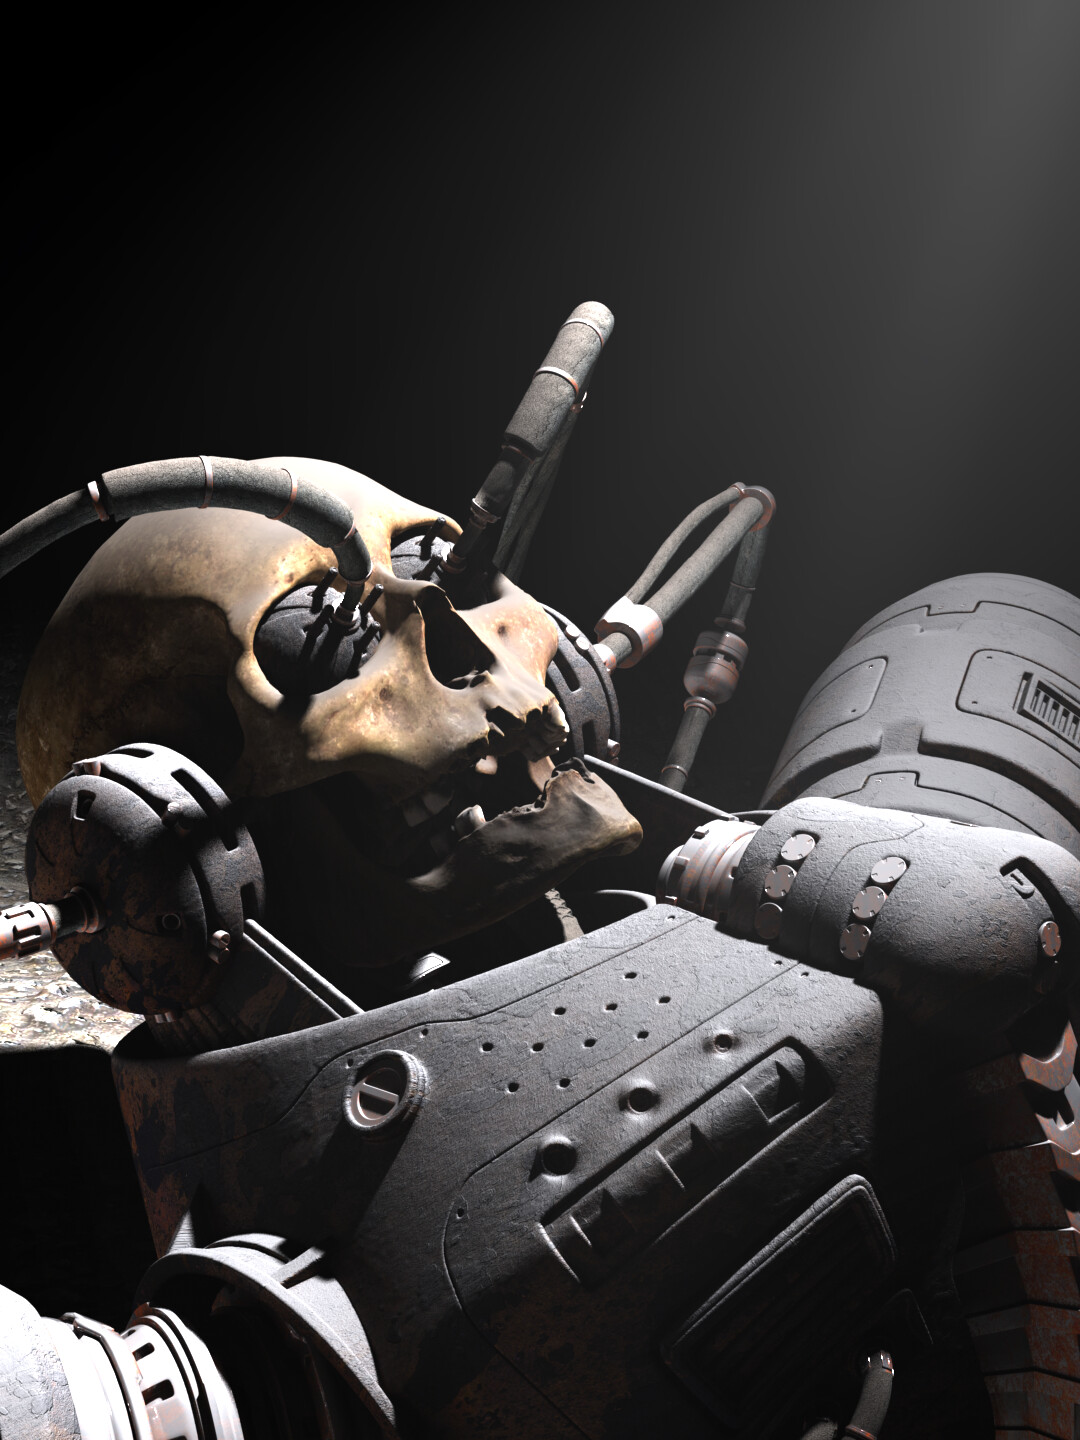 Found in a cave on a small body of the Tucana M system, the artifact is believed to be a cyborg soldier involved during the final Zone War. Though, it is worth mentionning that the only organic part of this type of unit is its original human skull.